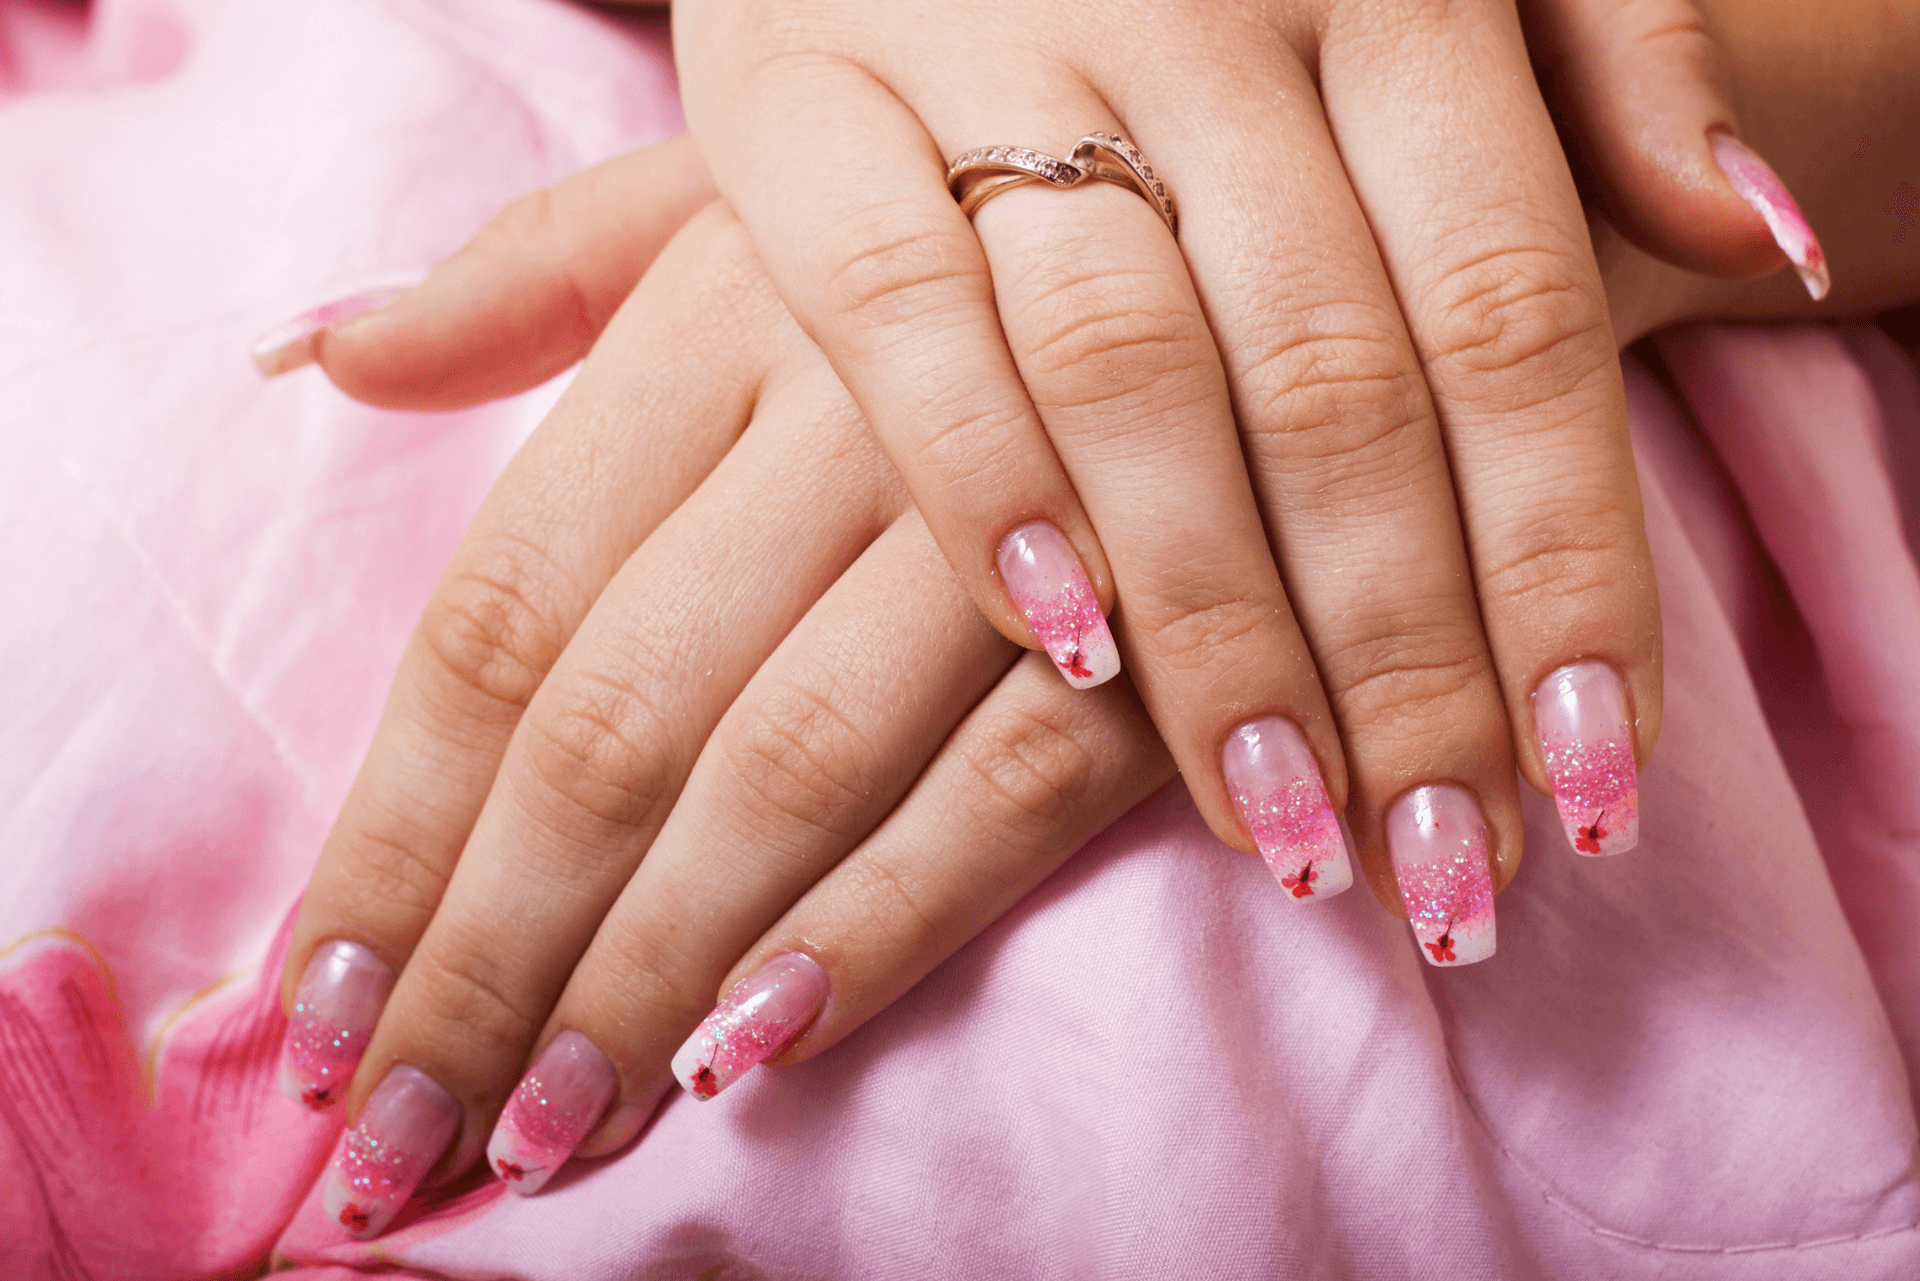 6. Gel Nail Design for Long Nails - wide 3